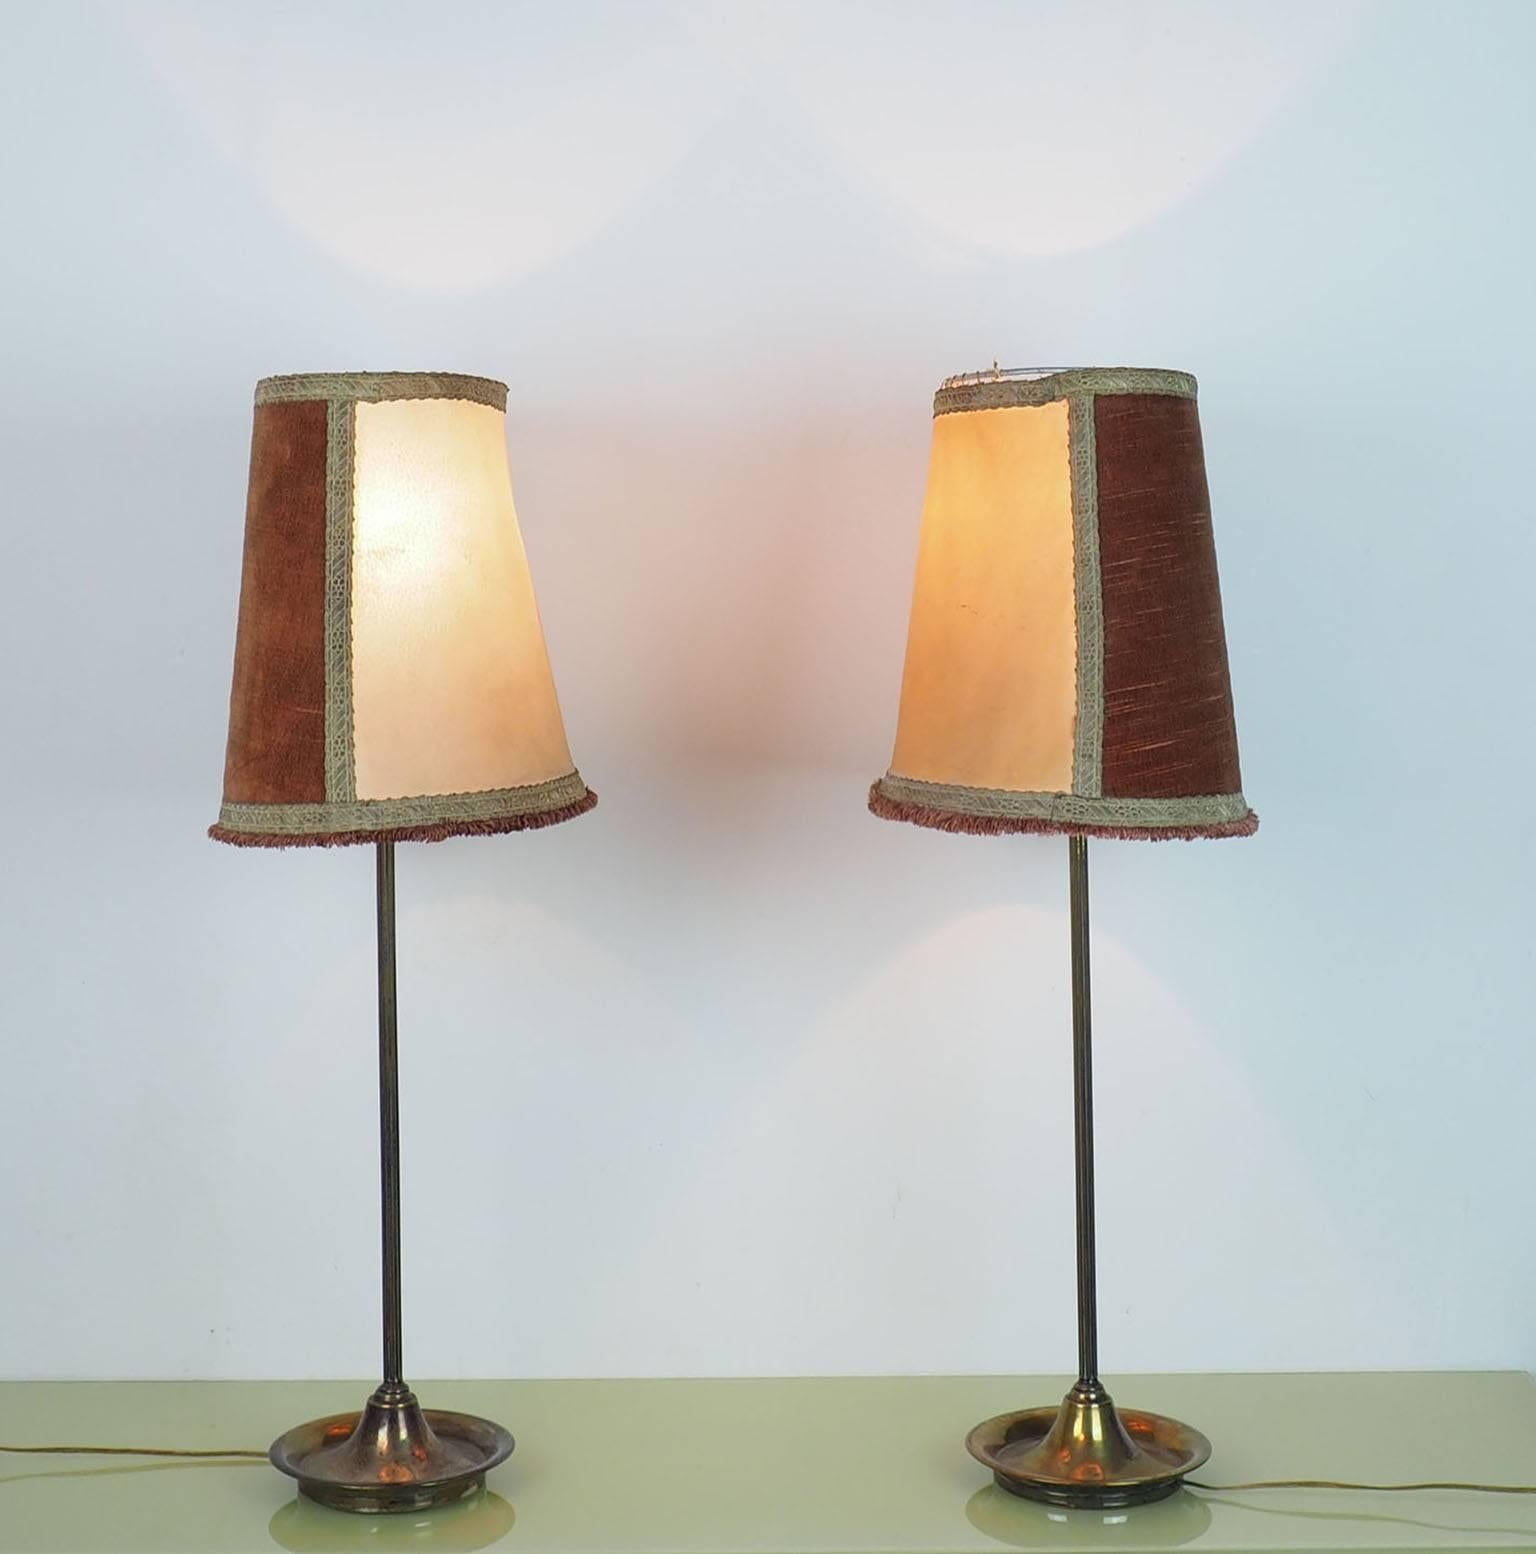 Mid-20th Century Pair of Large Table Lamps Brass with Bifronte lampshades by Chiarini Milano 1950